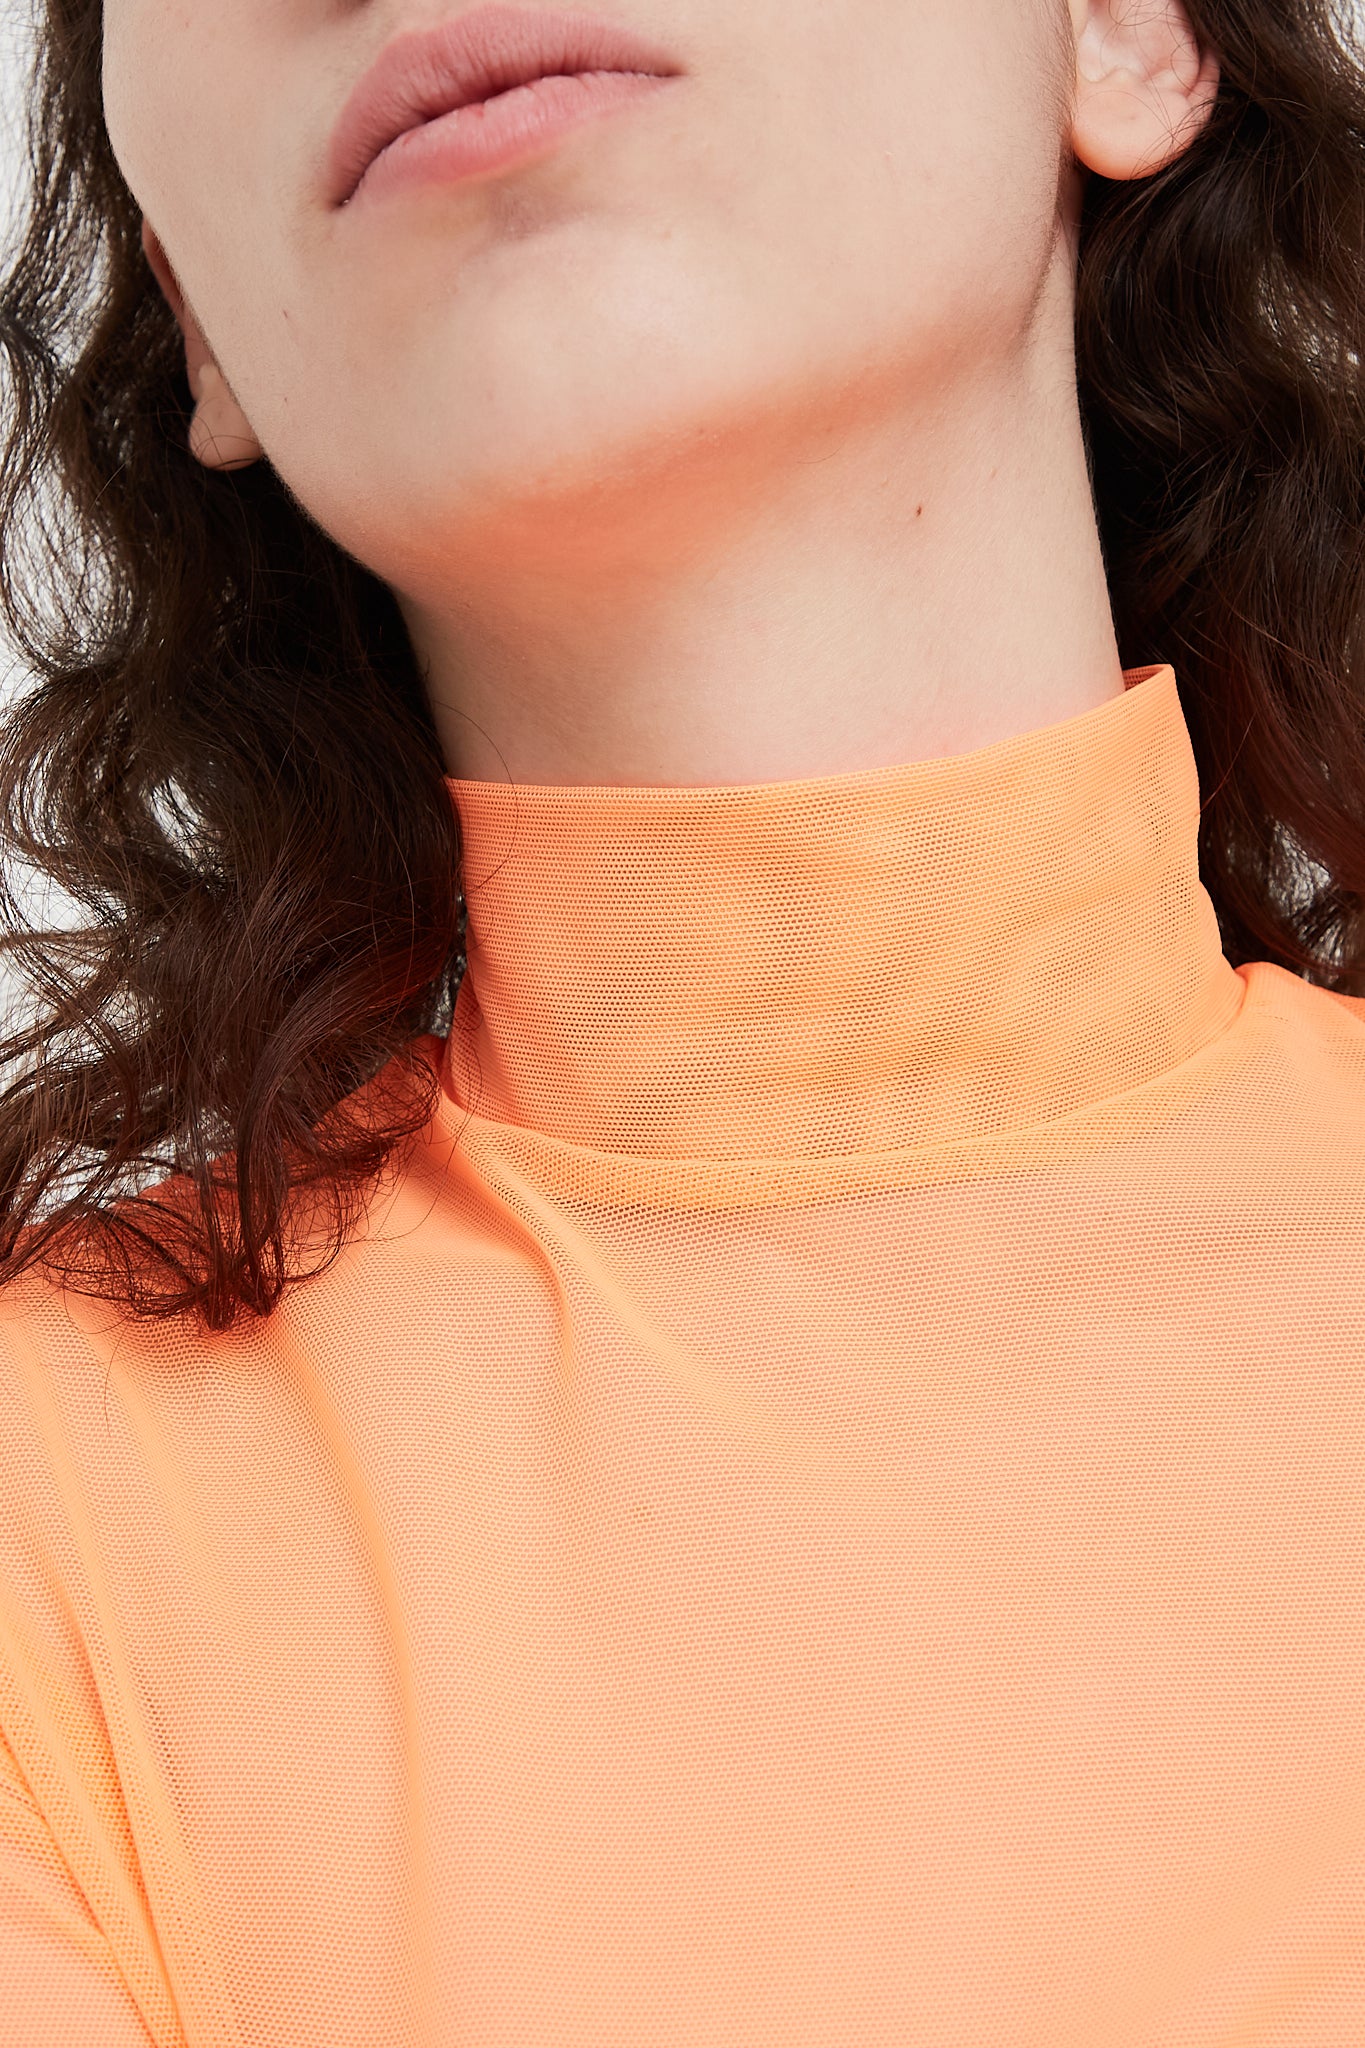 A Long Sleeve Mesh Mockneck in Fluoro Orange, designed by Nomia brand at Oroboro Store